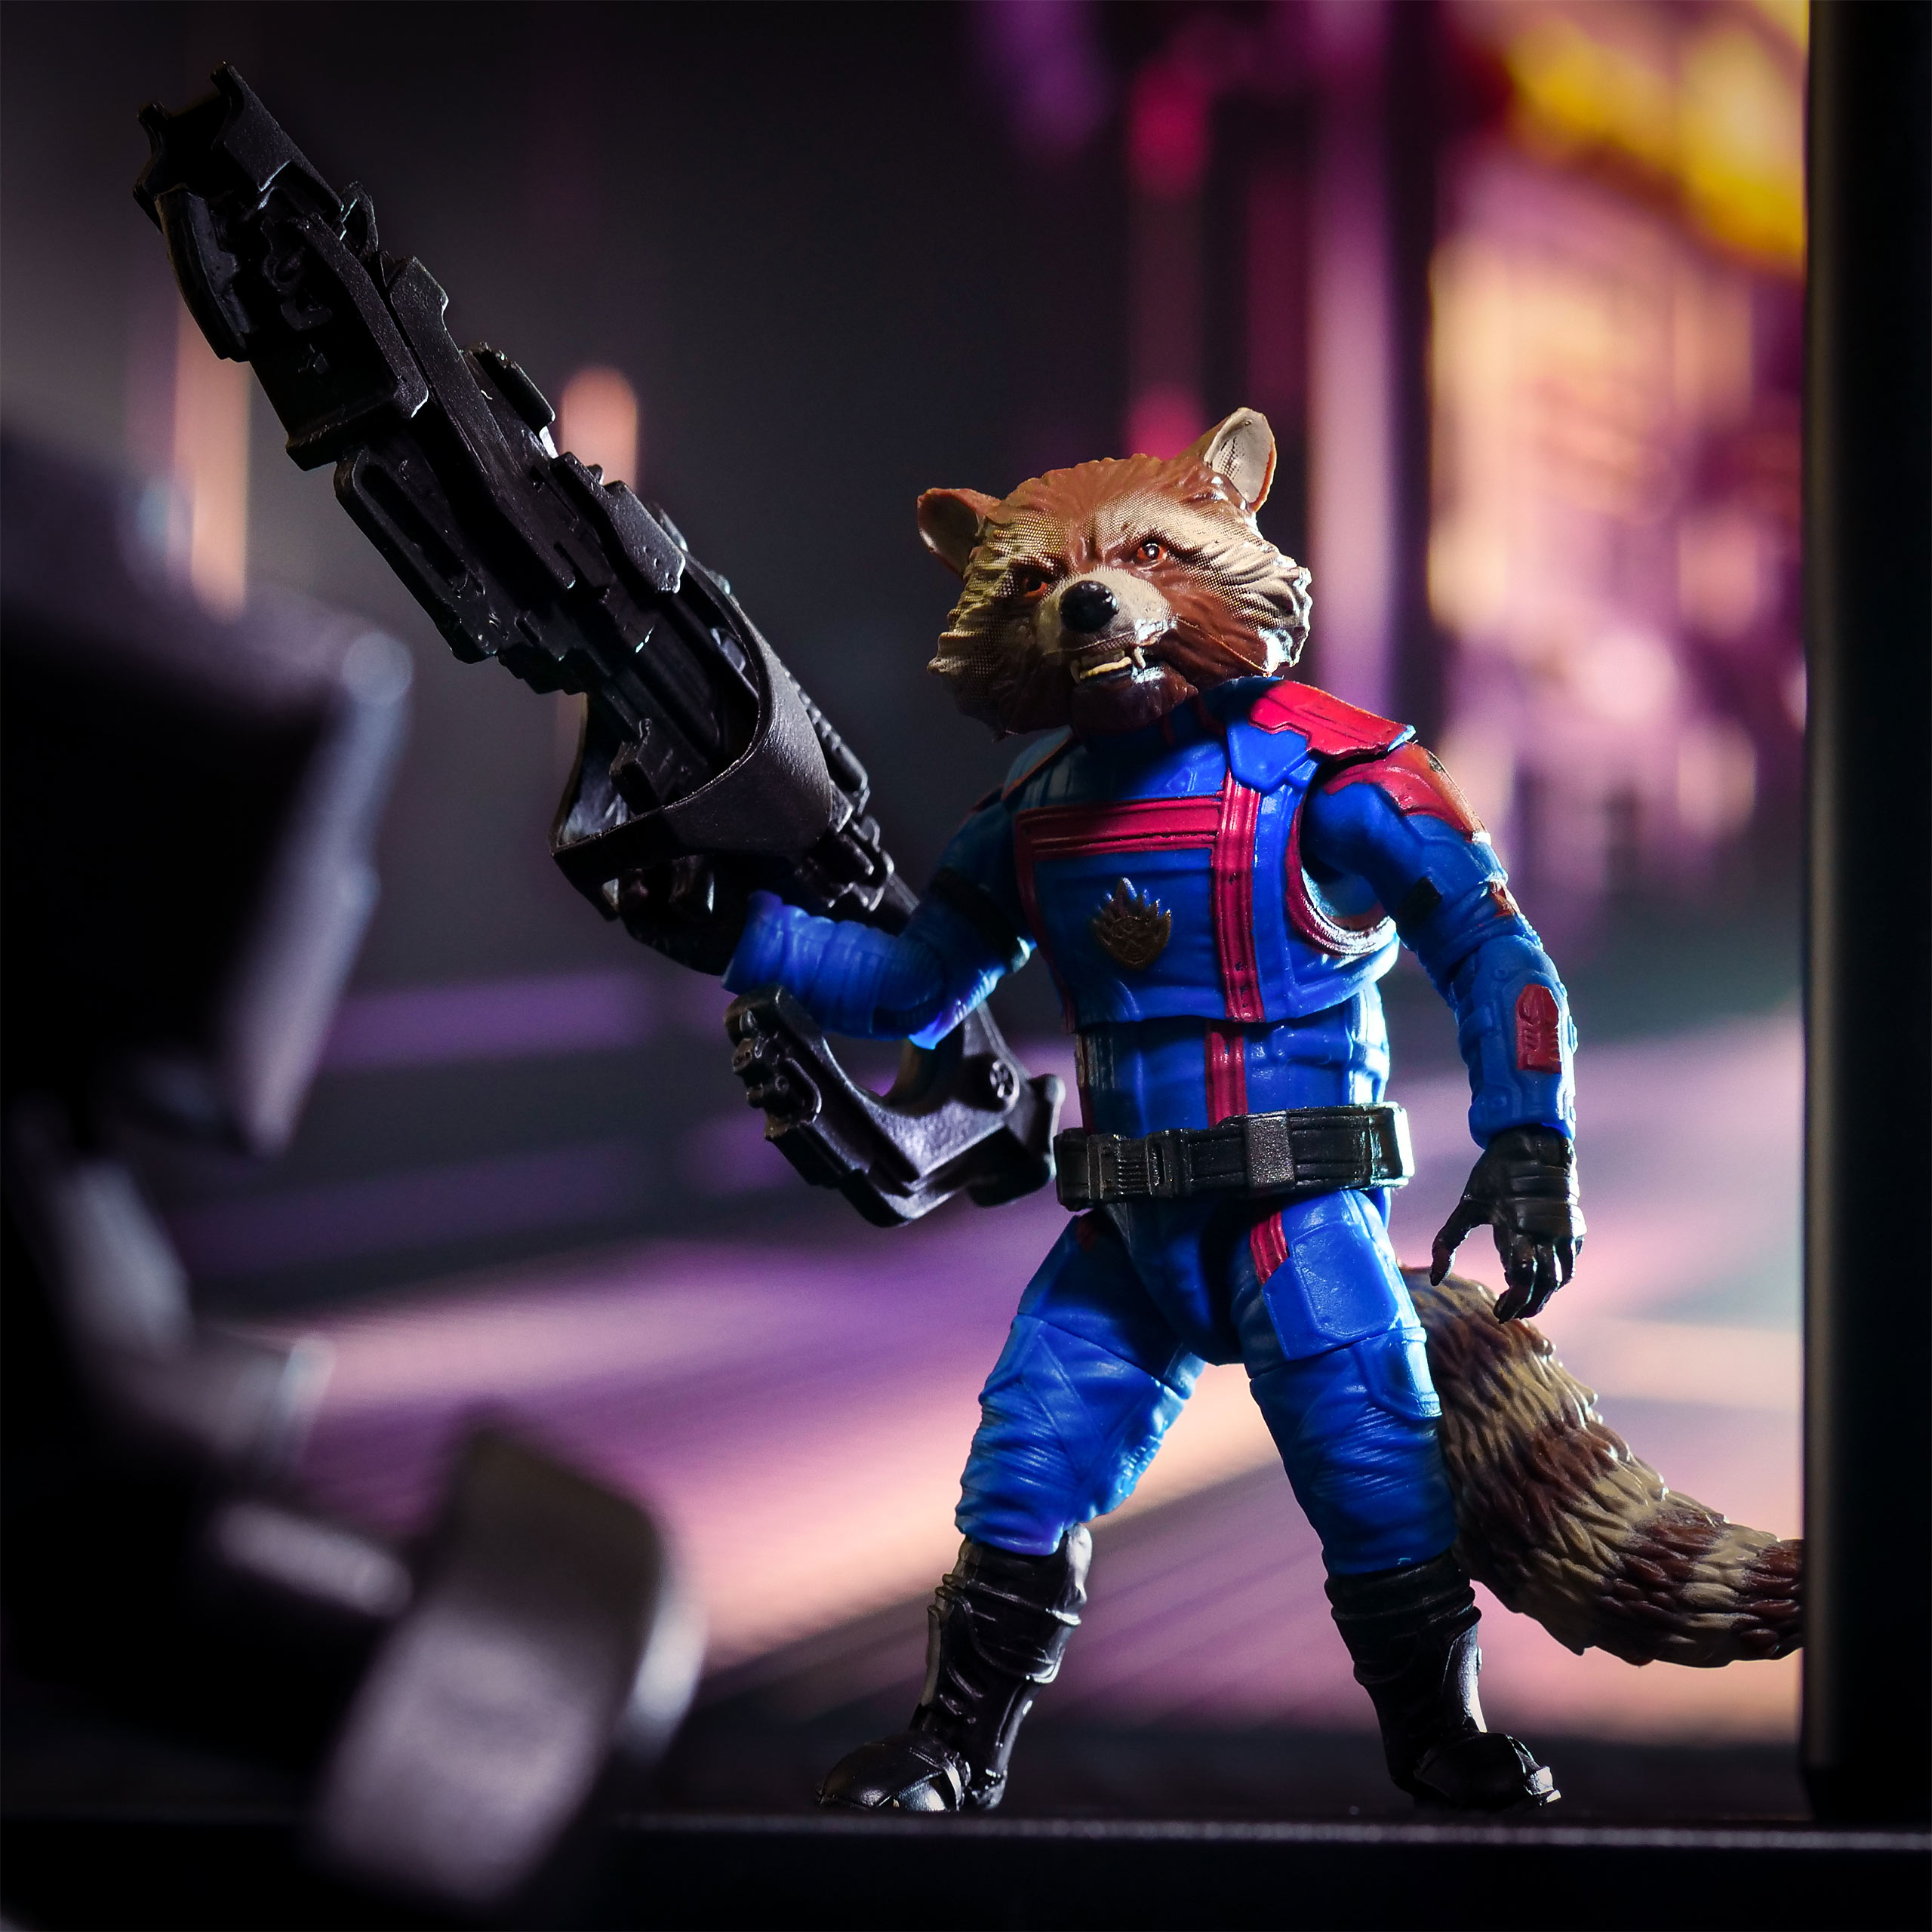 Guardians of the Galaxy 3 - Marvels Rocket Actionfigur